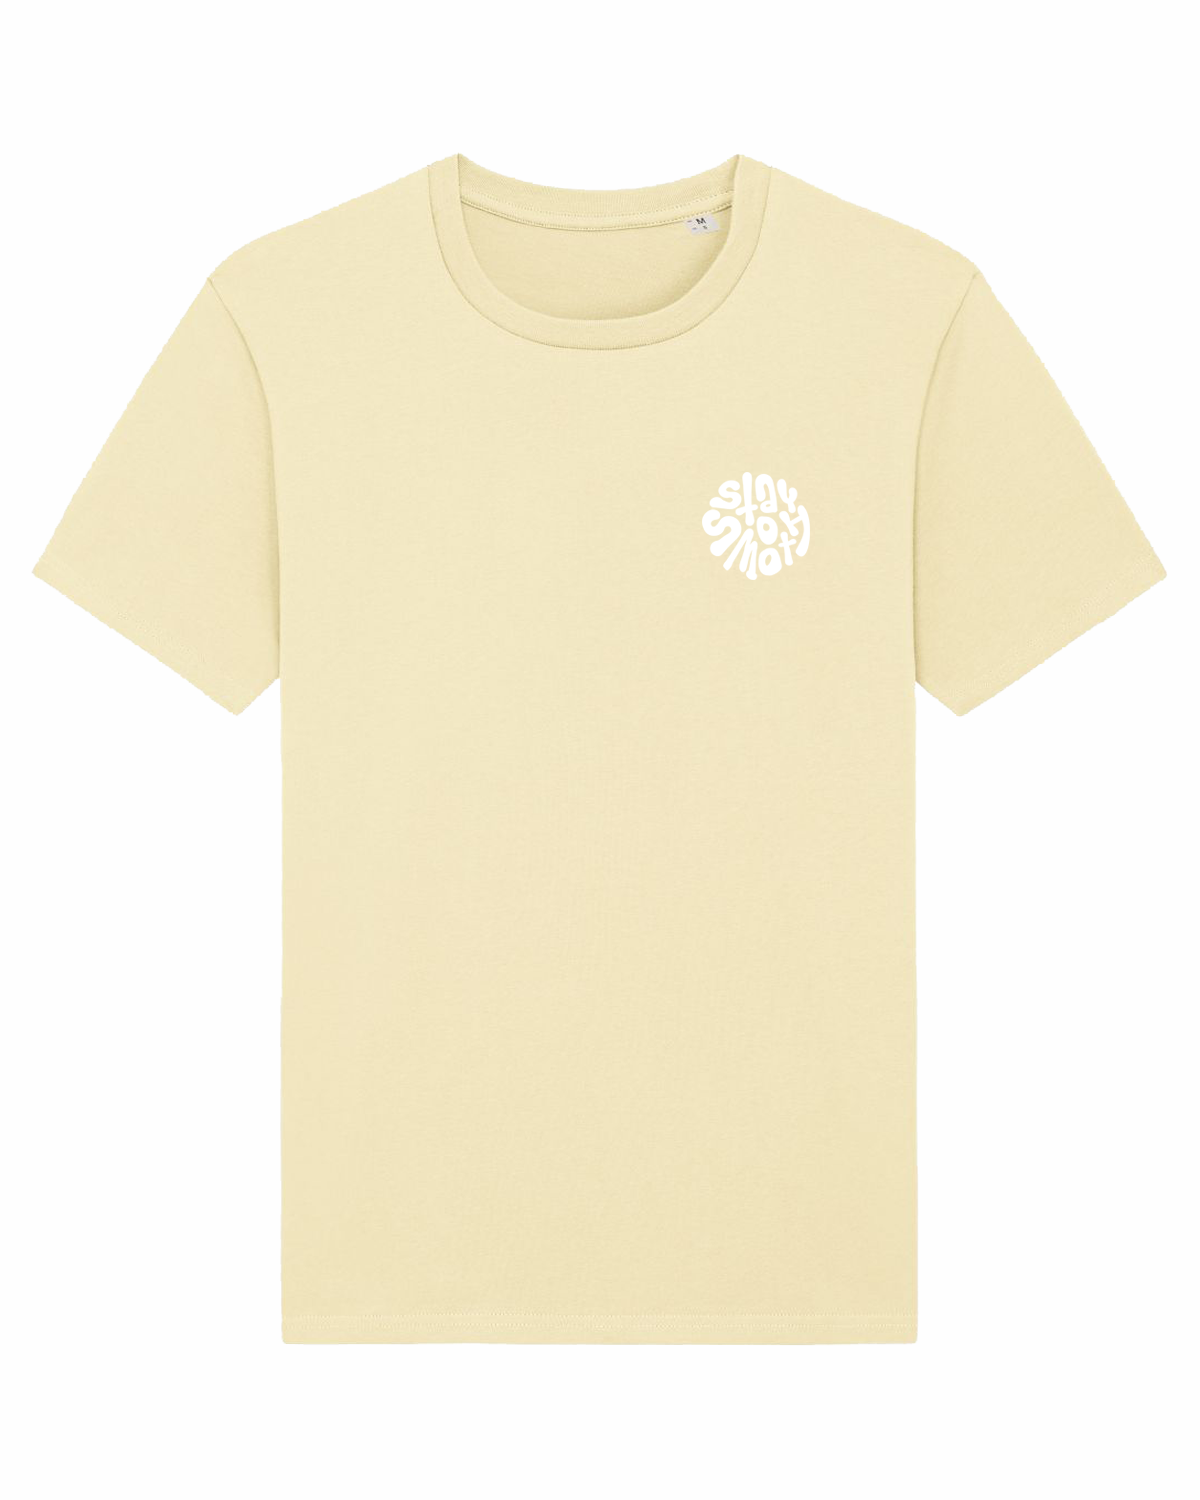 Soft Yellow T / Stay Smooth White Front Girls